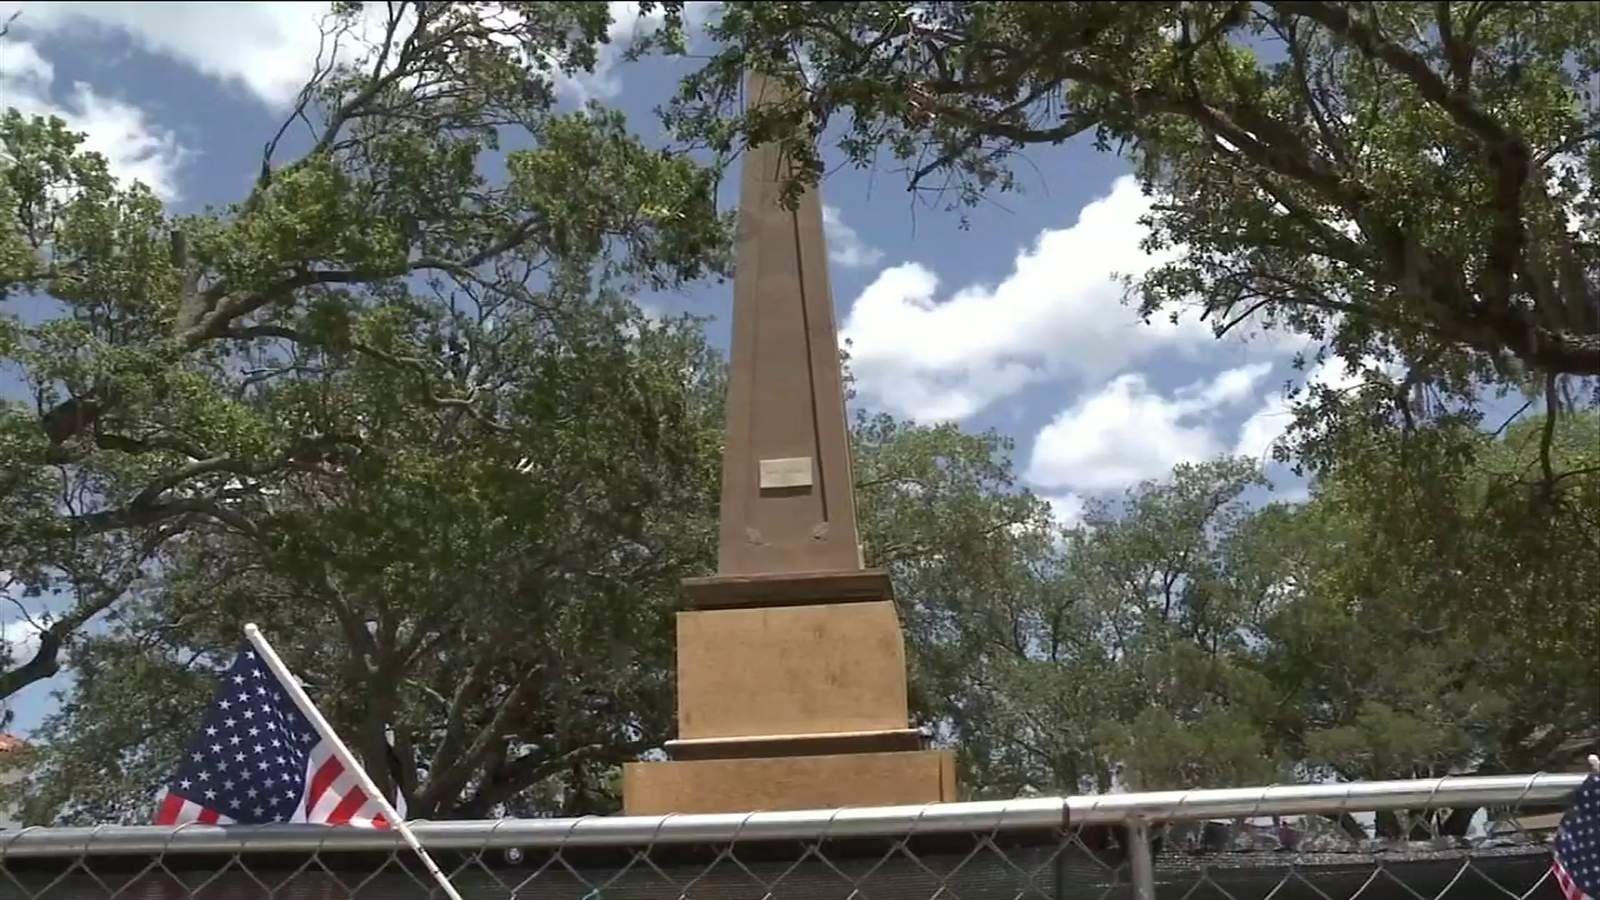 The fight over removing Floridas oldest Civil War monument in St. Augustine